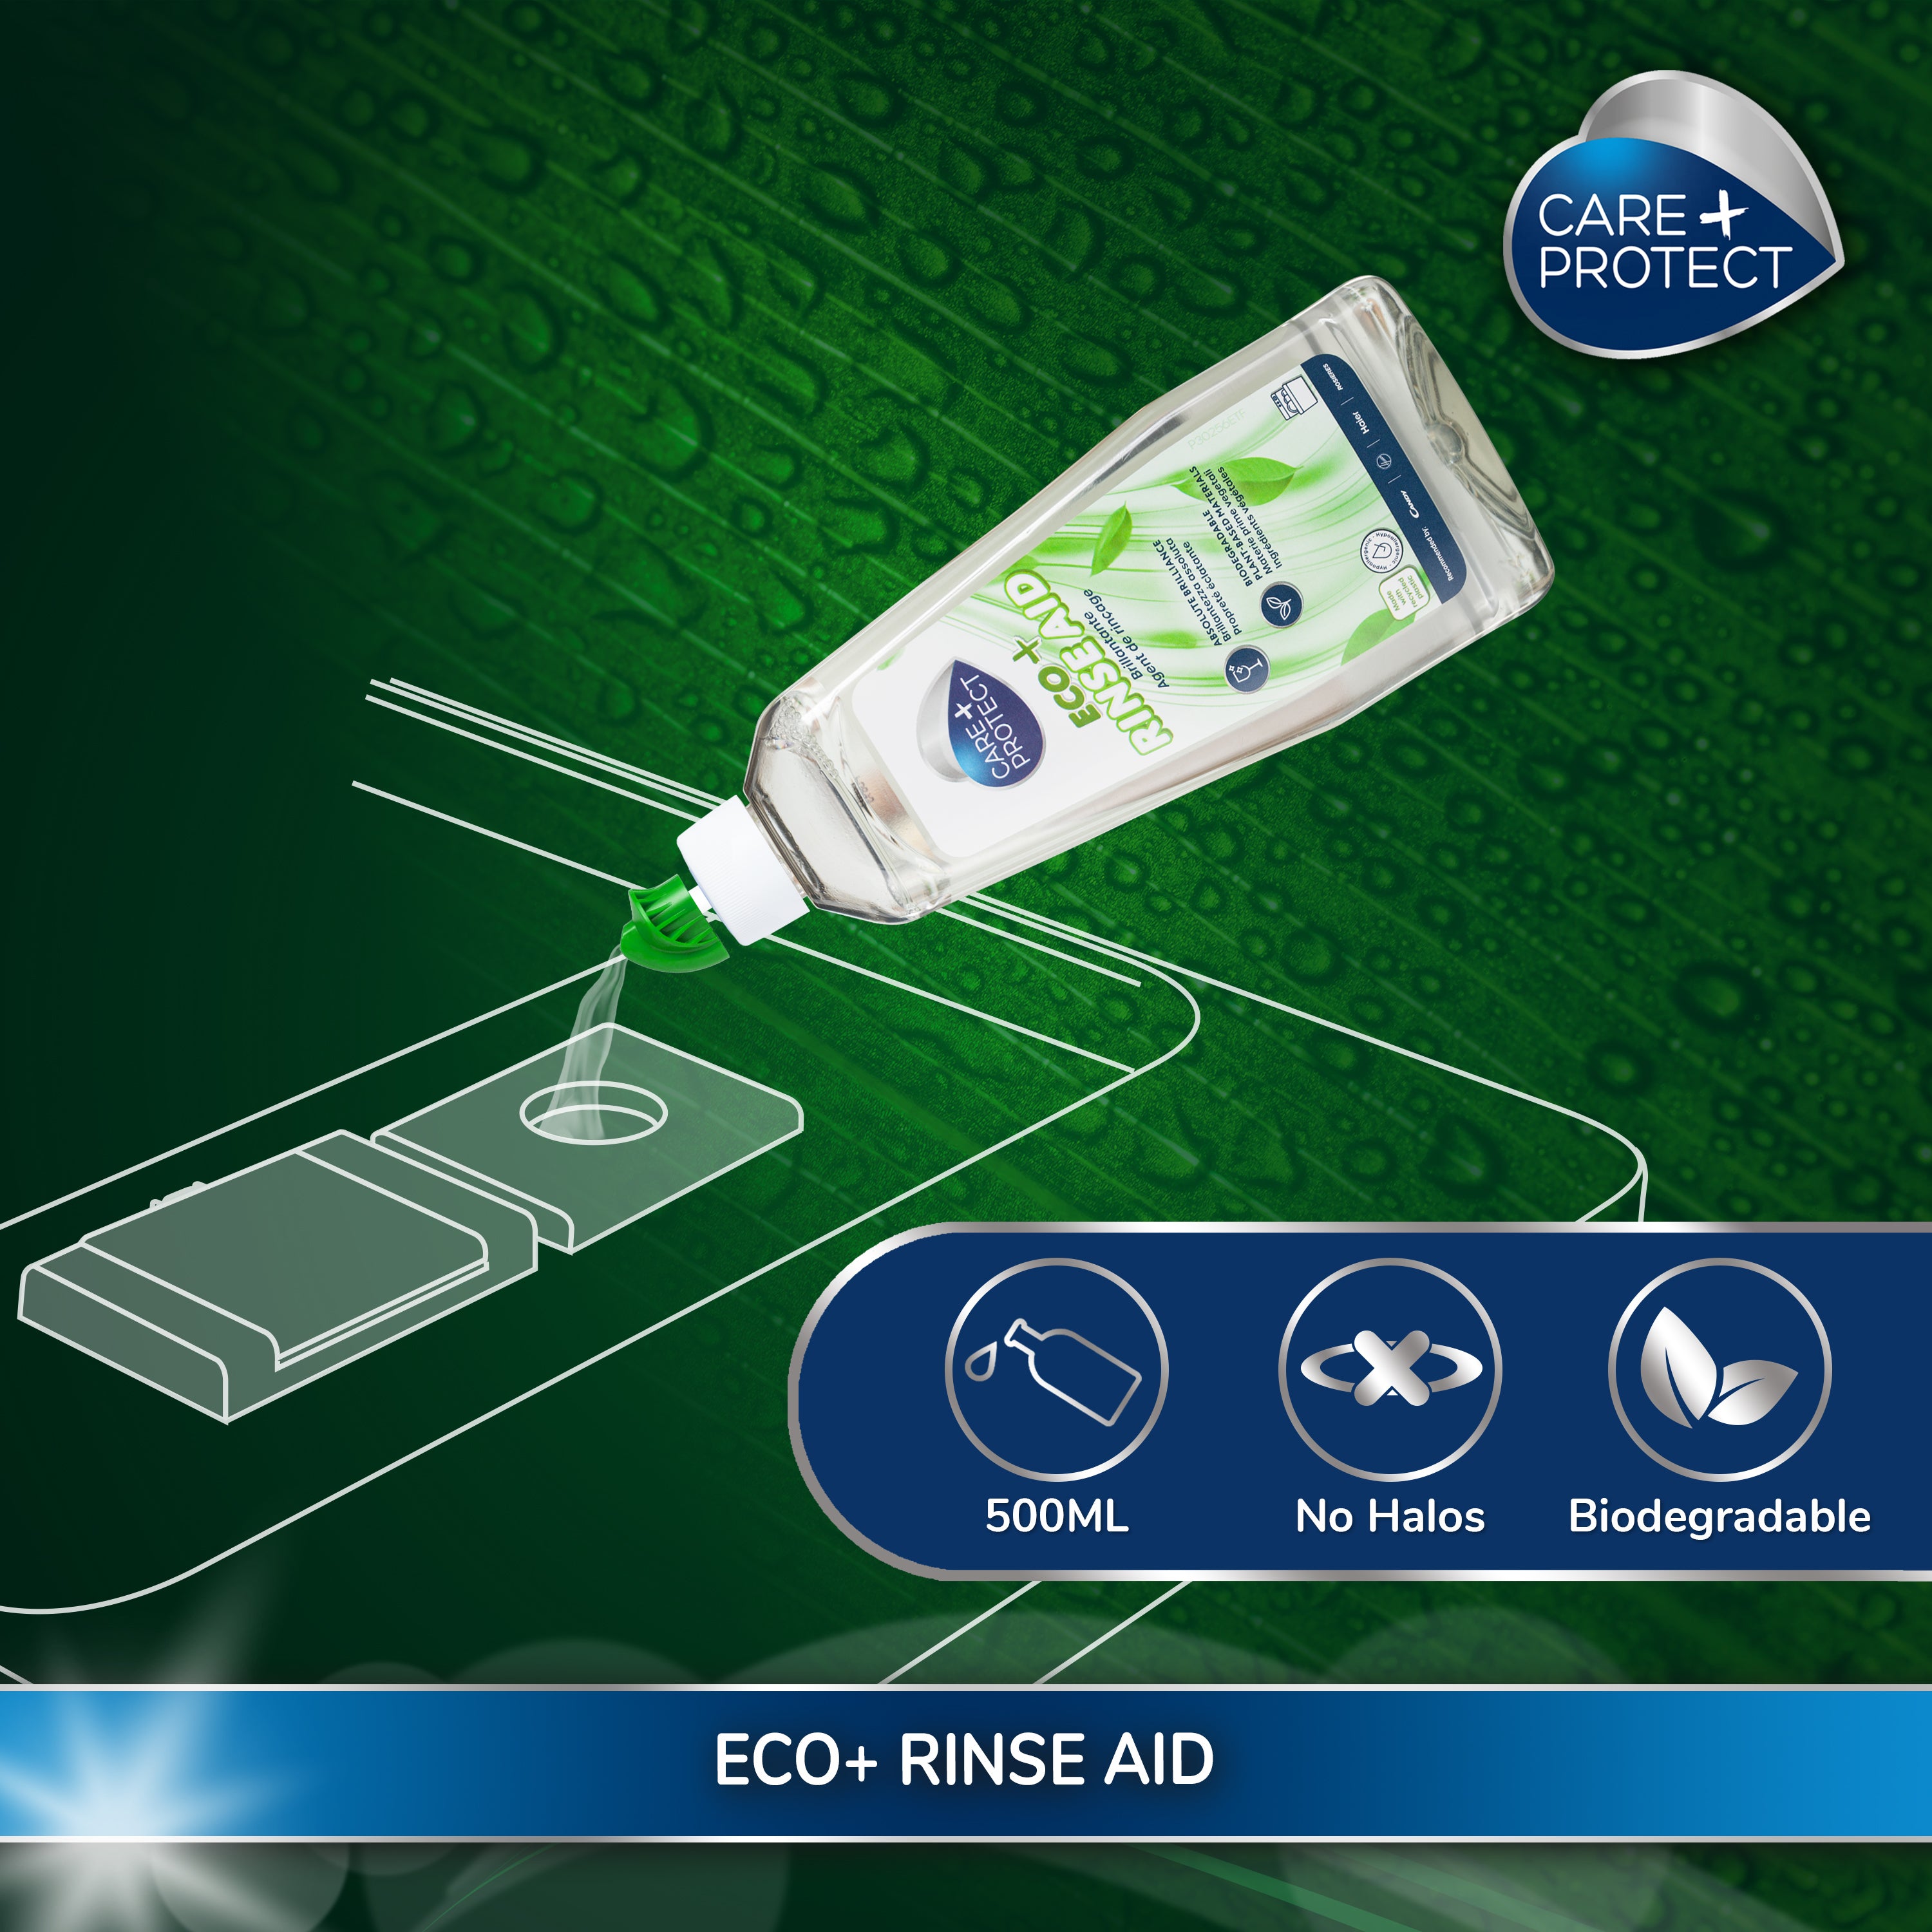 CARE + PROTECT ECO+ Rinse Aid for All Dishwashers, Hypoallergenic, Facilitates Quick Drying, Extra Shine, No Halos, 500 ml